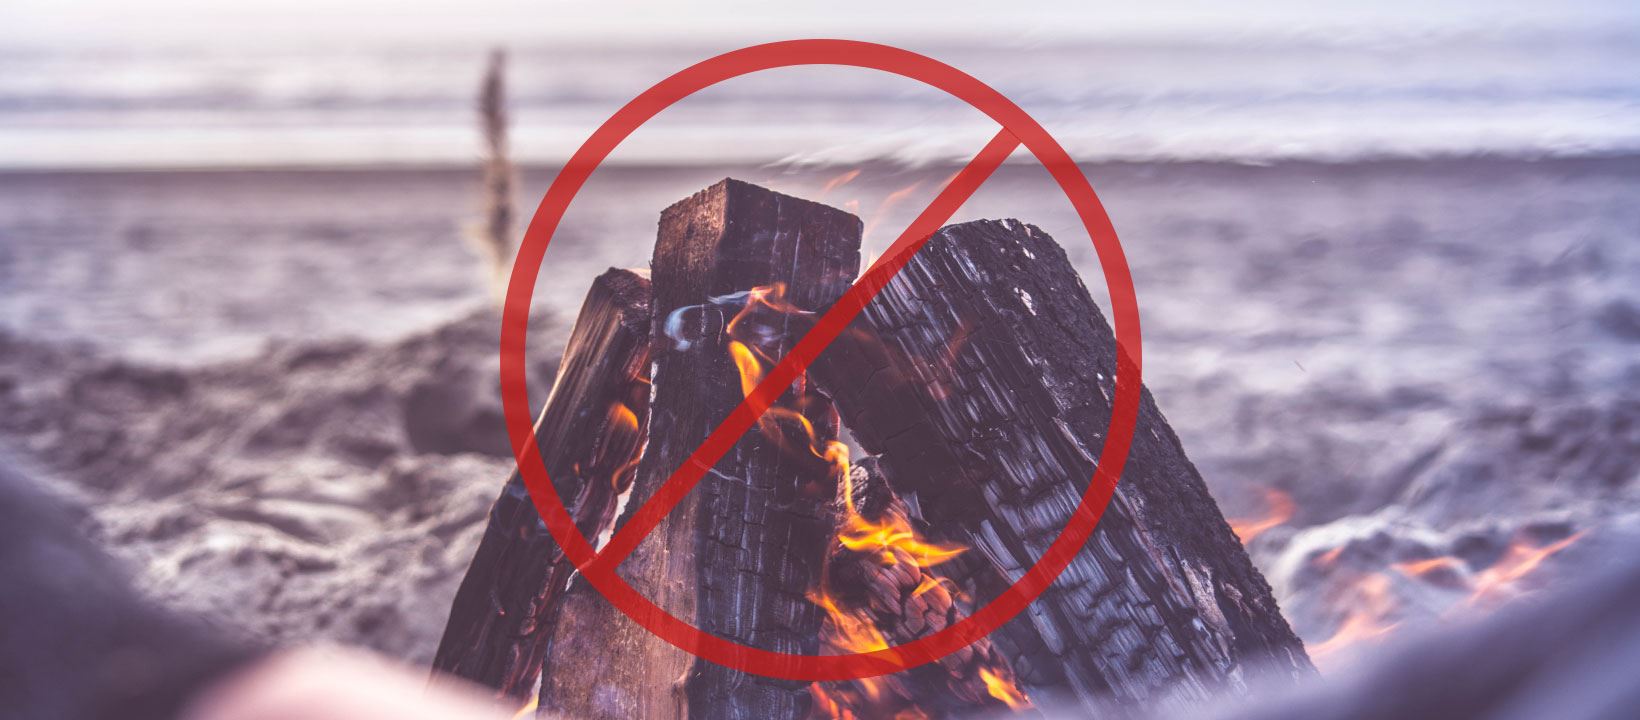 beach fires and open-air burning is not allowed at the waterfront.